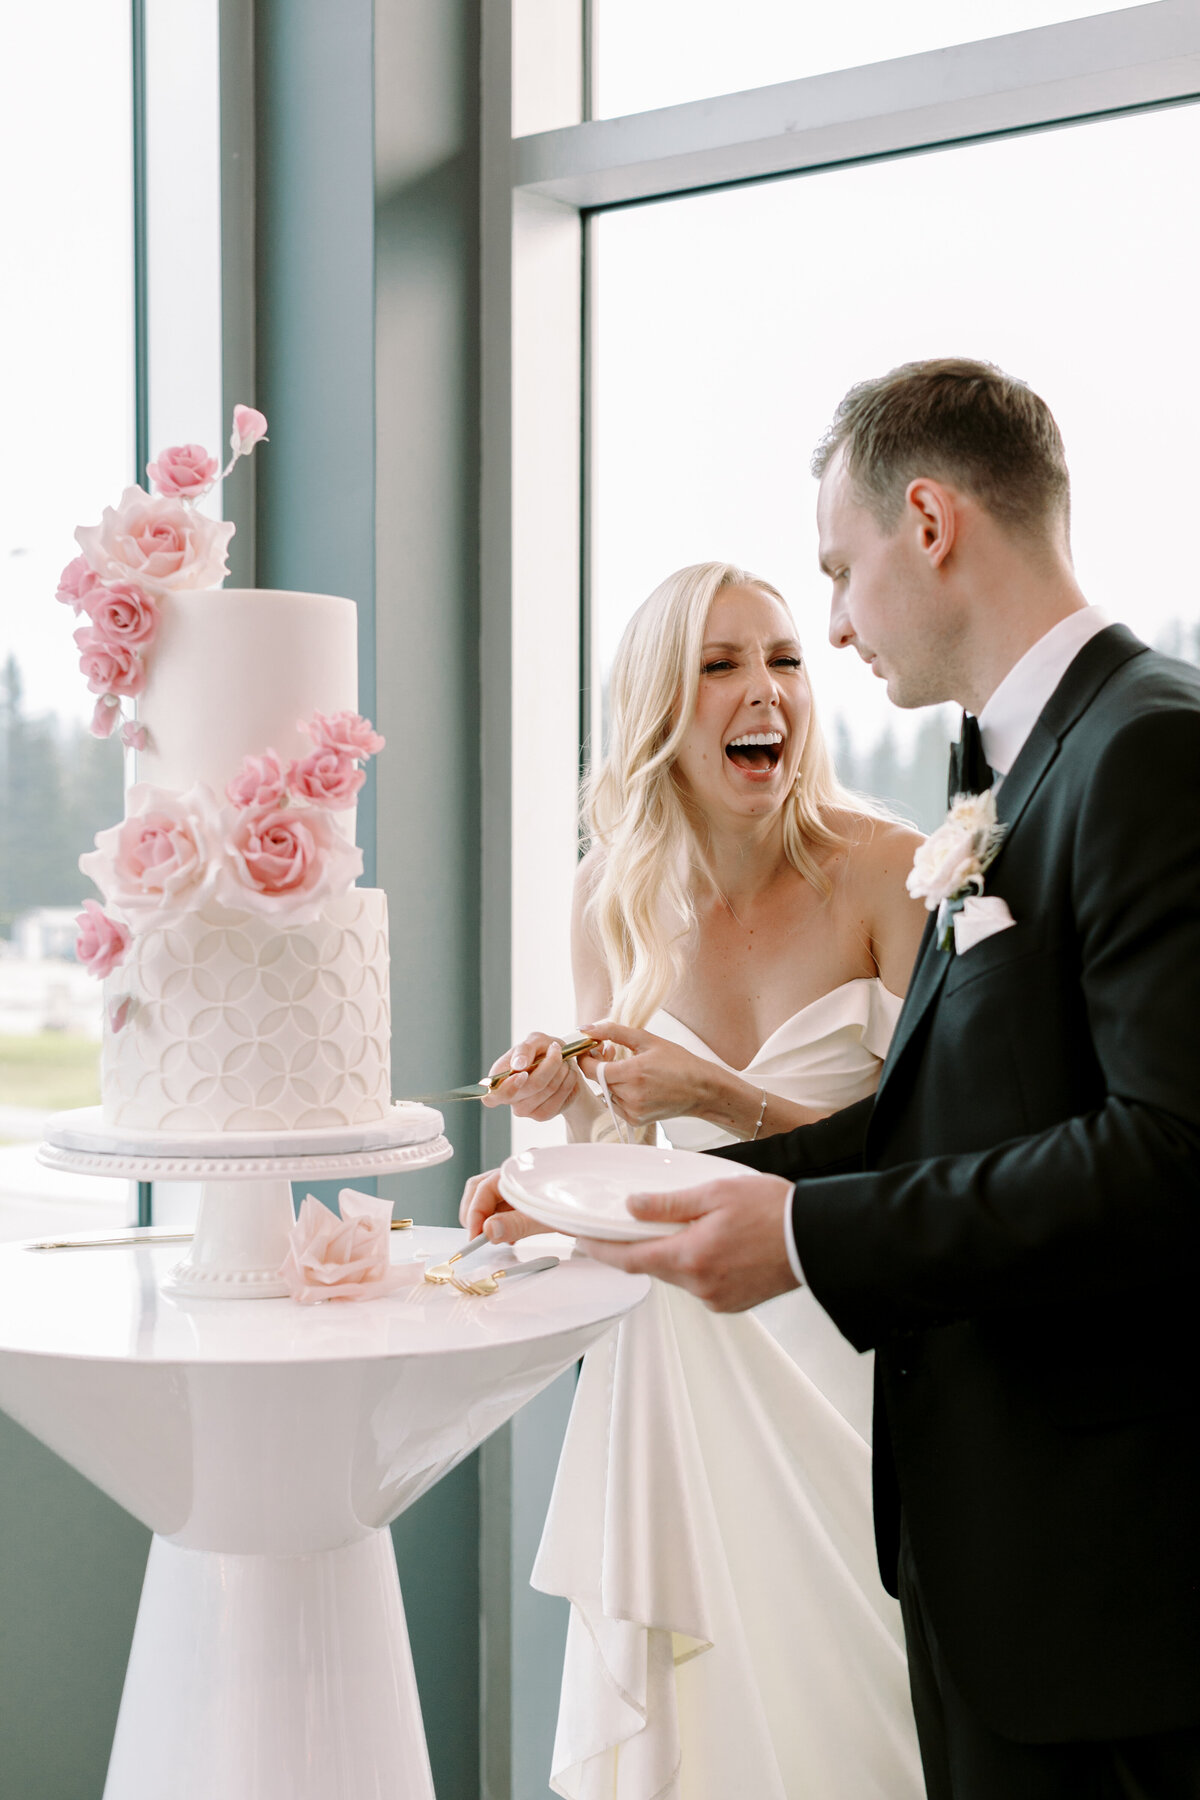 Modern Chic Wedding at The Sensory in Canmore Alberta, designed and planned by Rebekah Brontë, with a colour palette of fresh white, smoke grey, blush pink, and subtle seafoam - white and blush wedding cake by Yvonne's Delightful Cakes, cake cutting photos